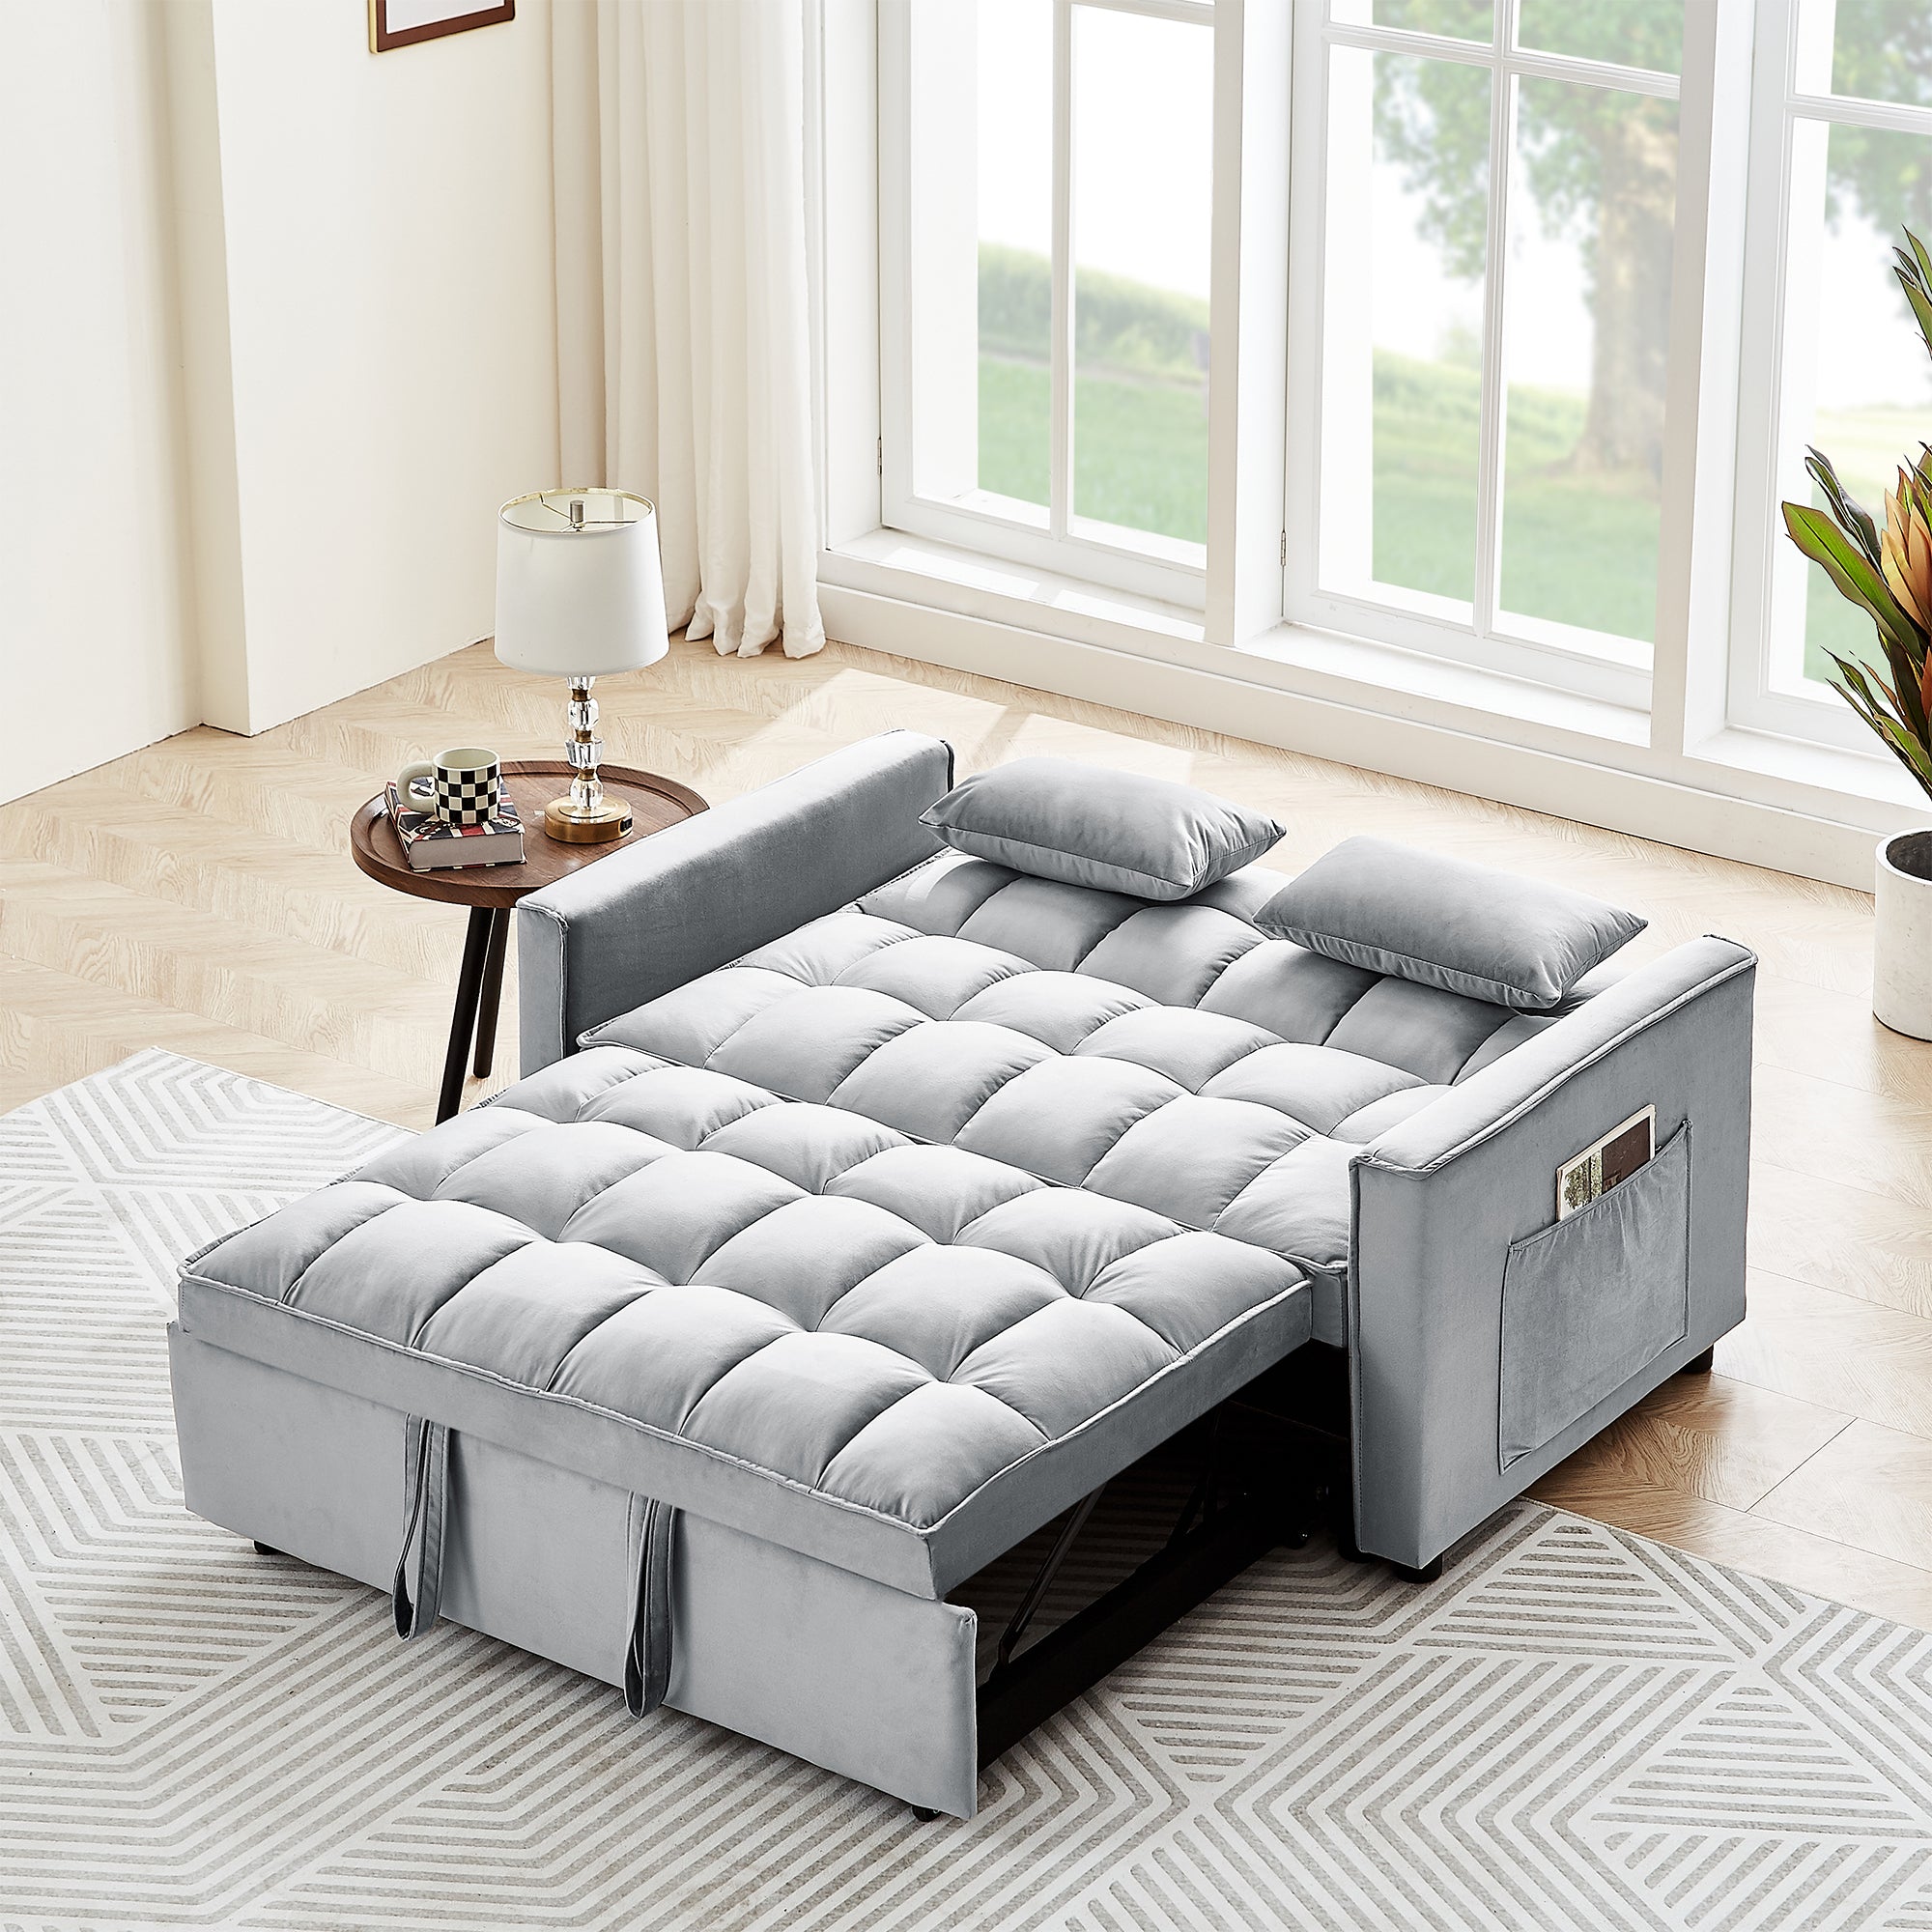 55" Sleeper Sofa Couch w/ Pull Out Bed,  Pillows & Side Pockets, Bright Gray